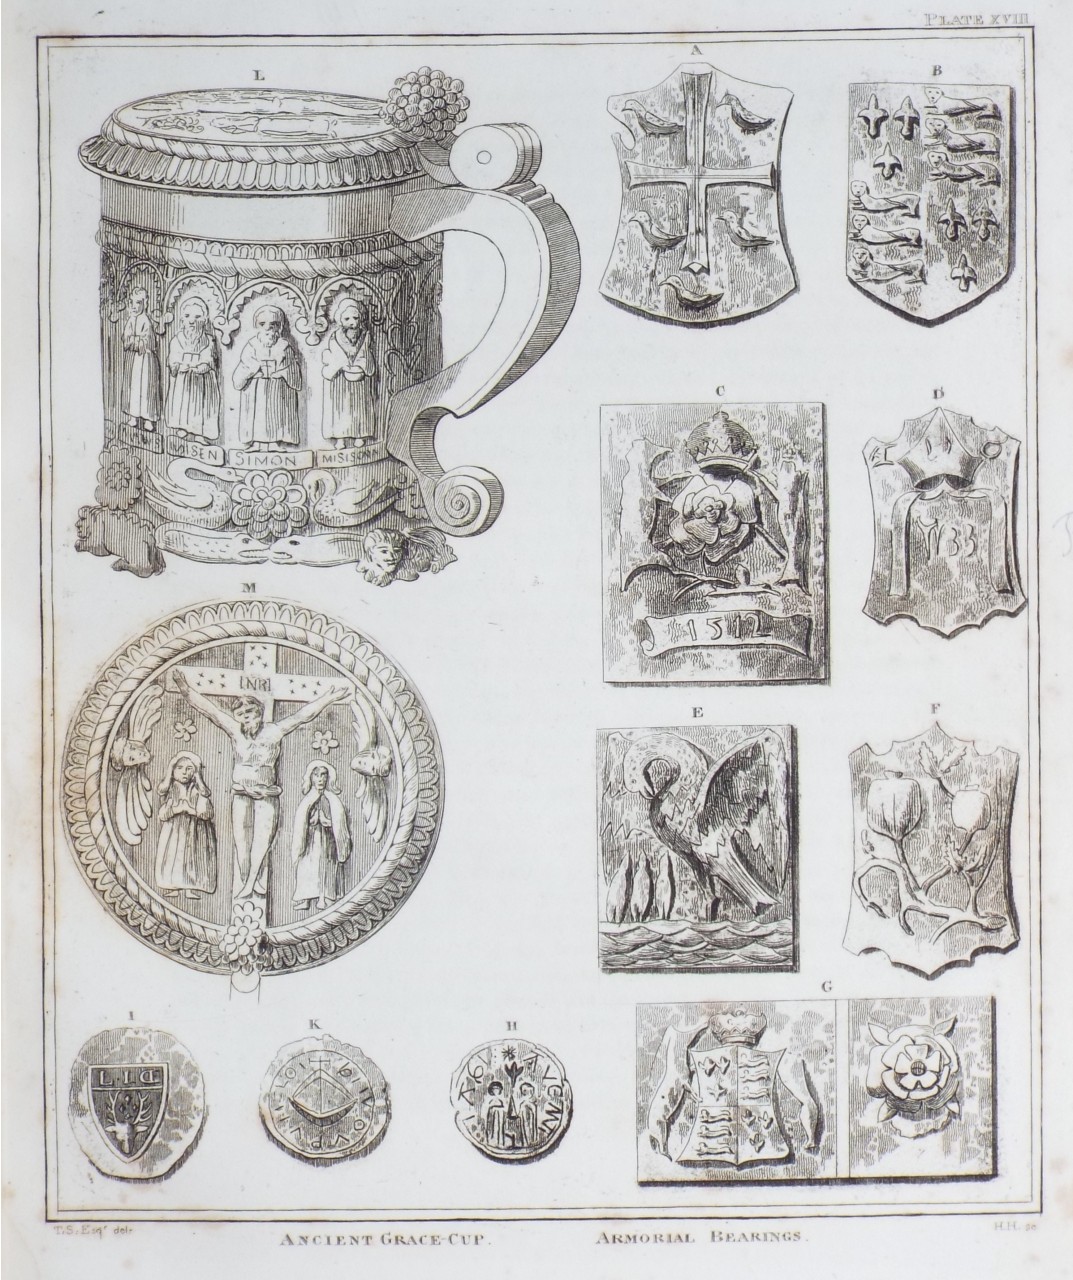 Print - Ancient Grace-Cup. Armorial Bearings. - Hobson